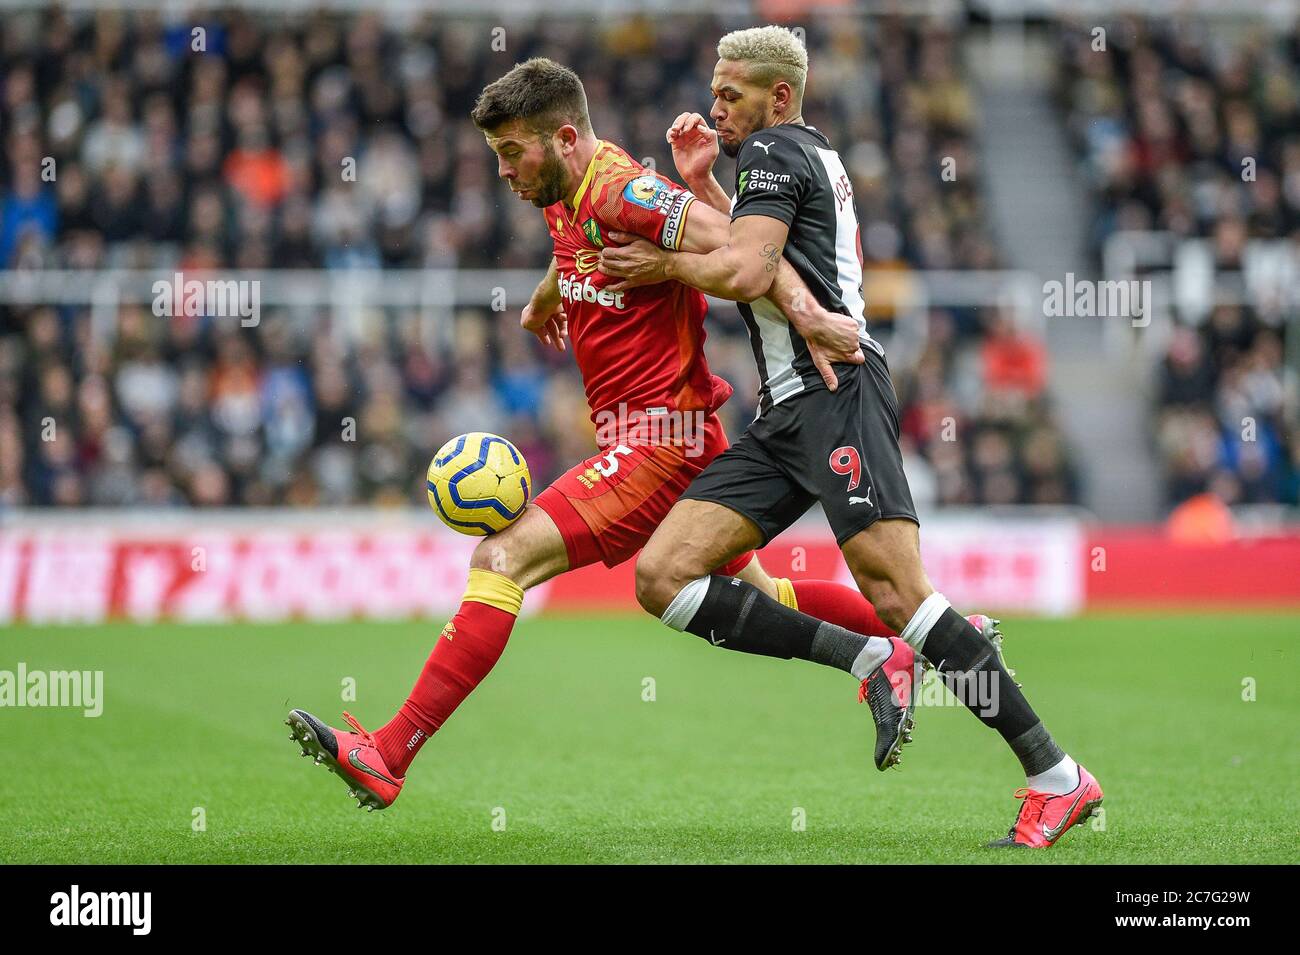 1st February 2020, St. James's Park, Newcastle, England; Premier League, Newcastle United v Norwich City : Grant Hanley (5) of Norwich City under pressure from Joelinton (9) of Newcastle United Stock Photo